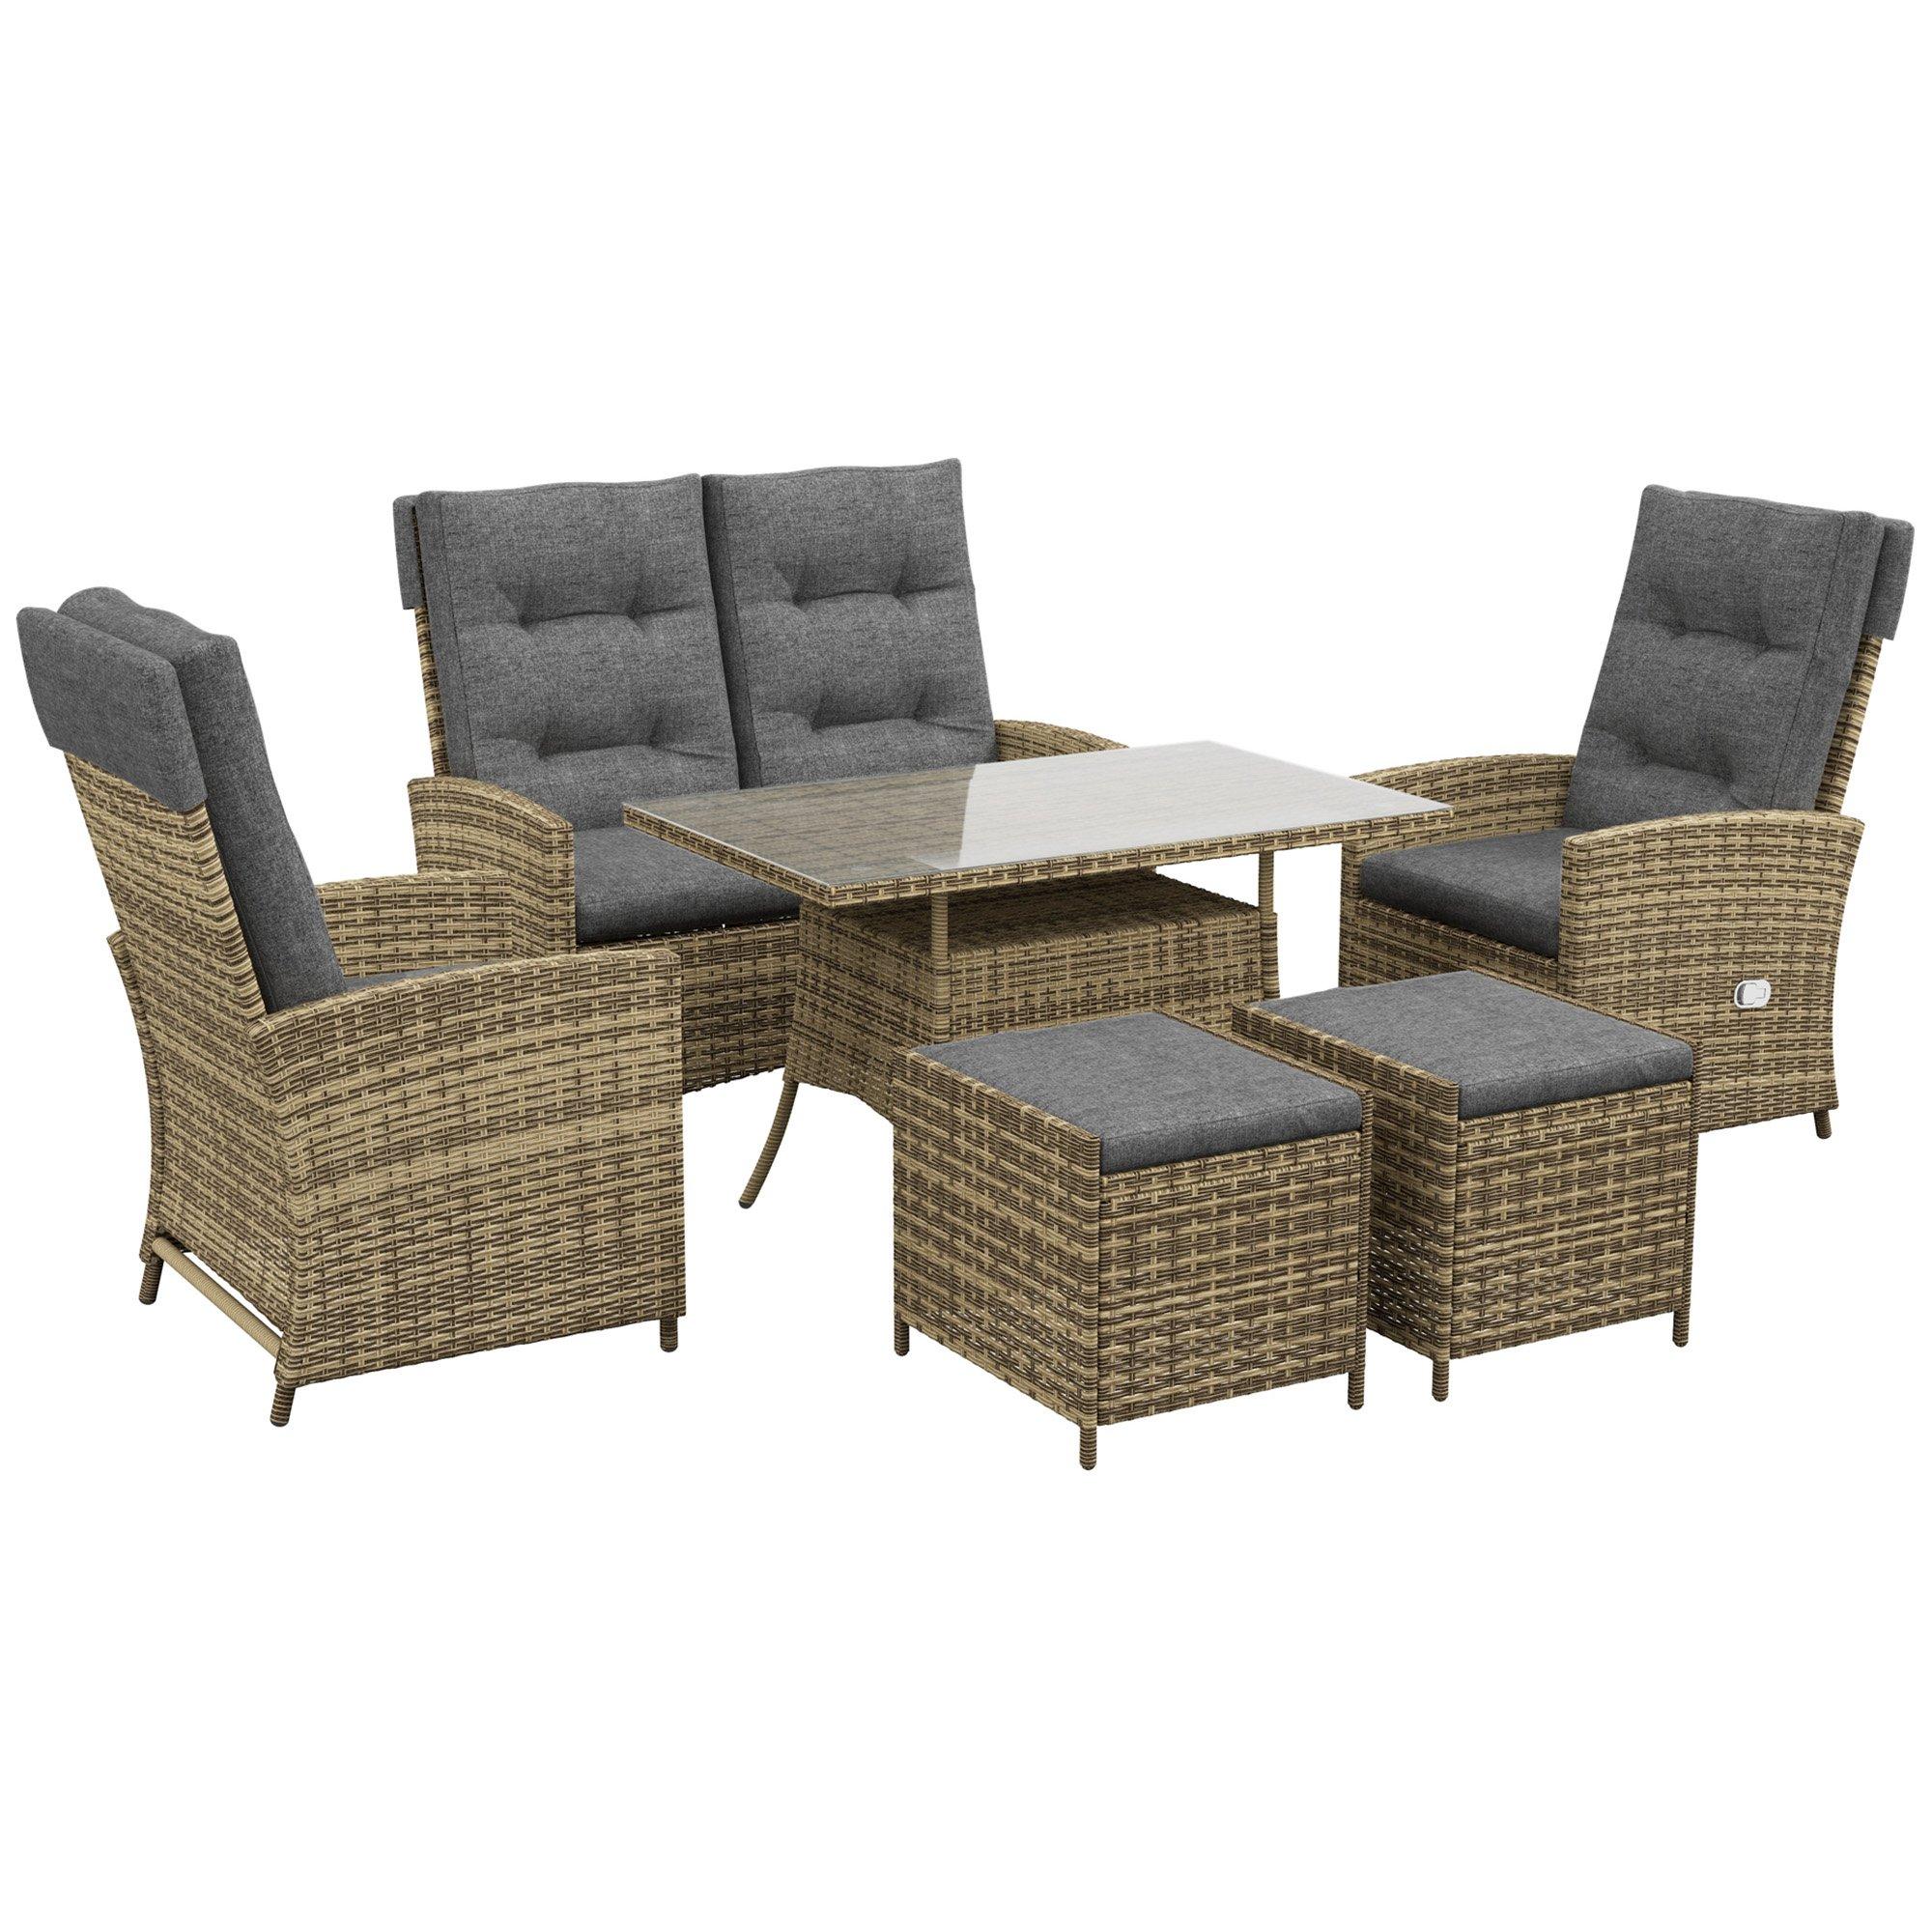 6 Piece Rattan Table and Chairs Set with Cushions for Outdoor Grey